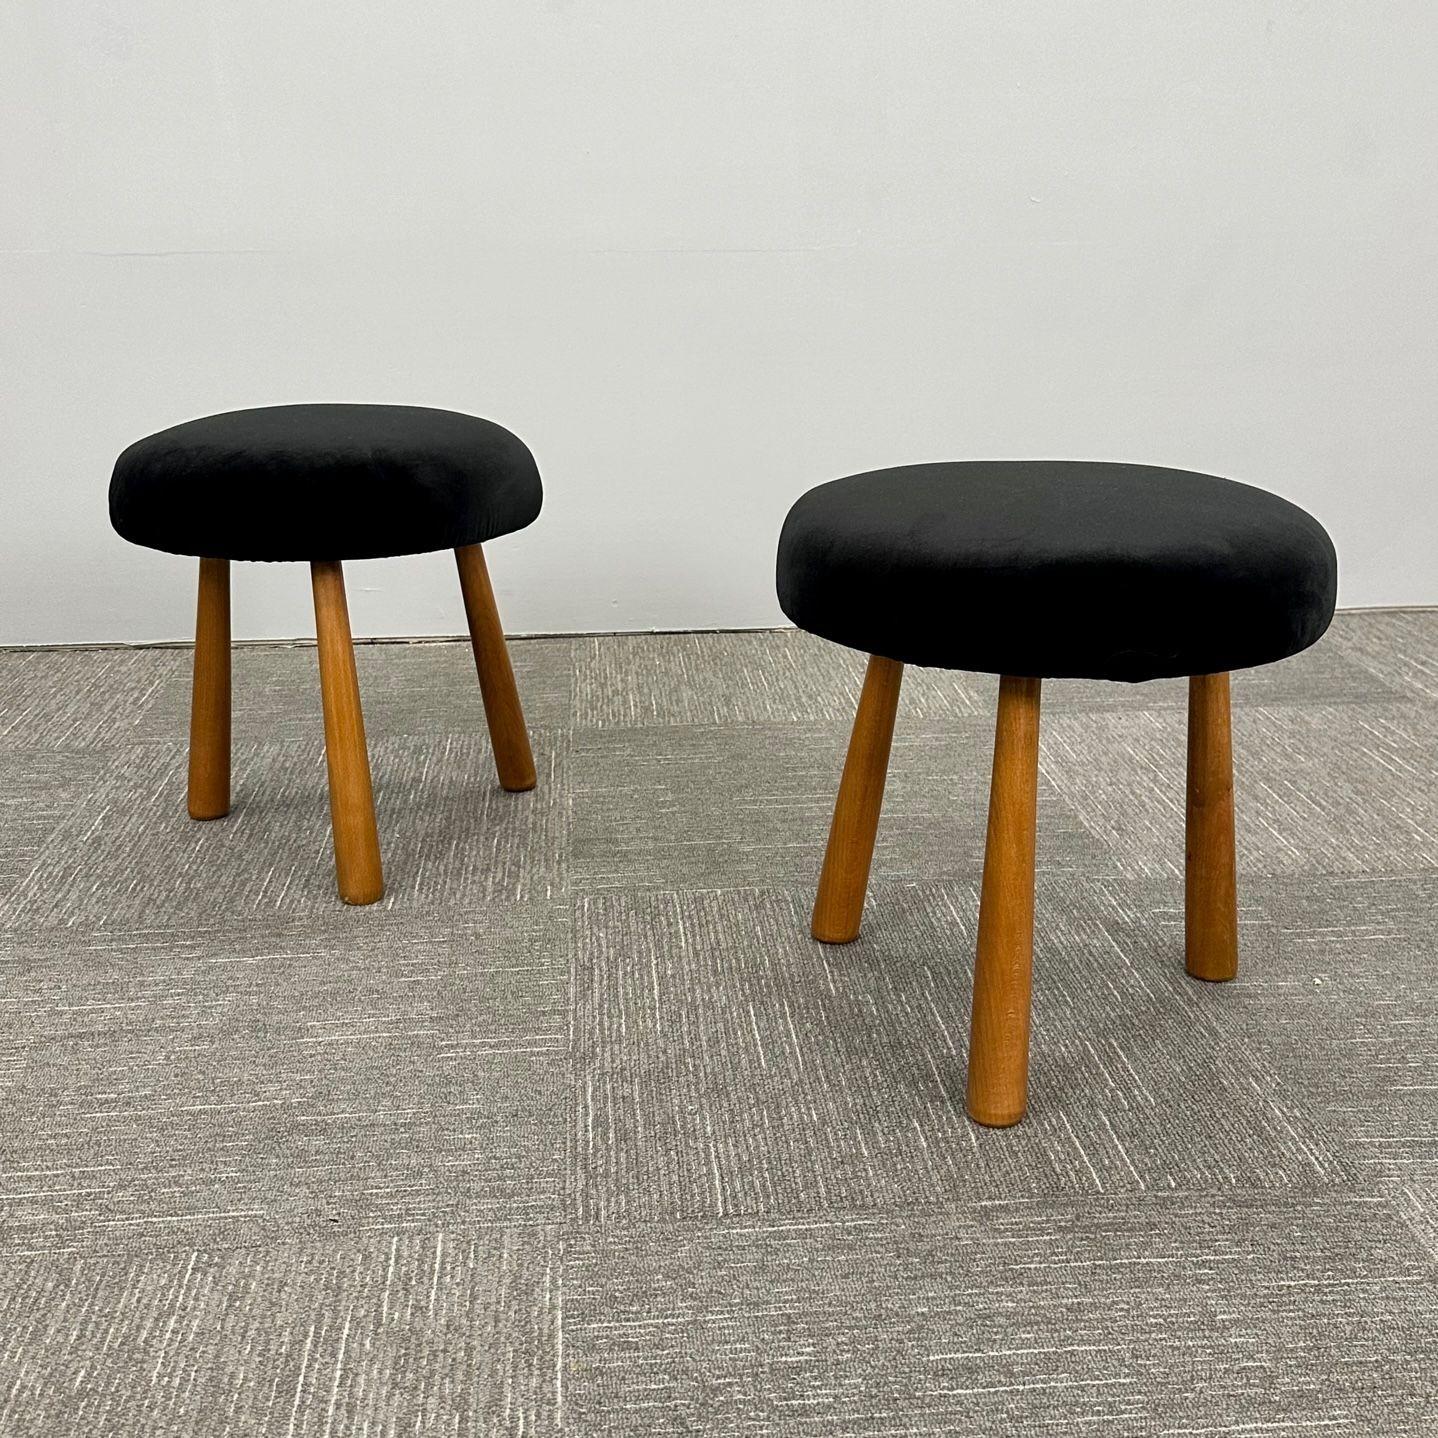 Mohair Pair of Contemporary Swedish Mid-Century Modern Style Stools / Ottoman / Bench